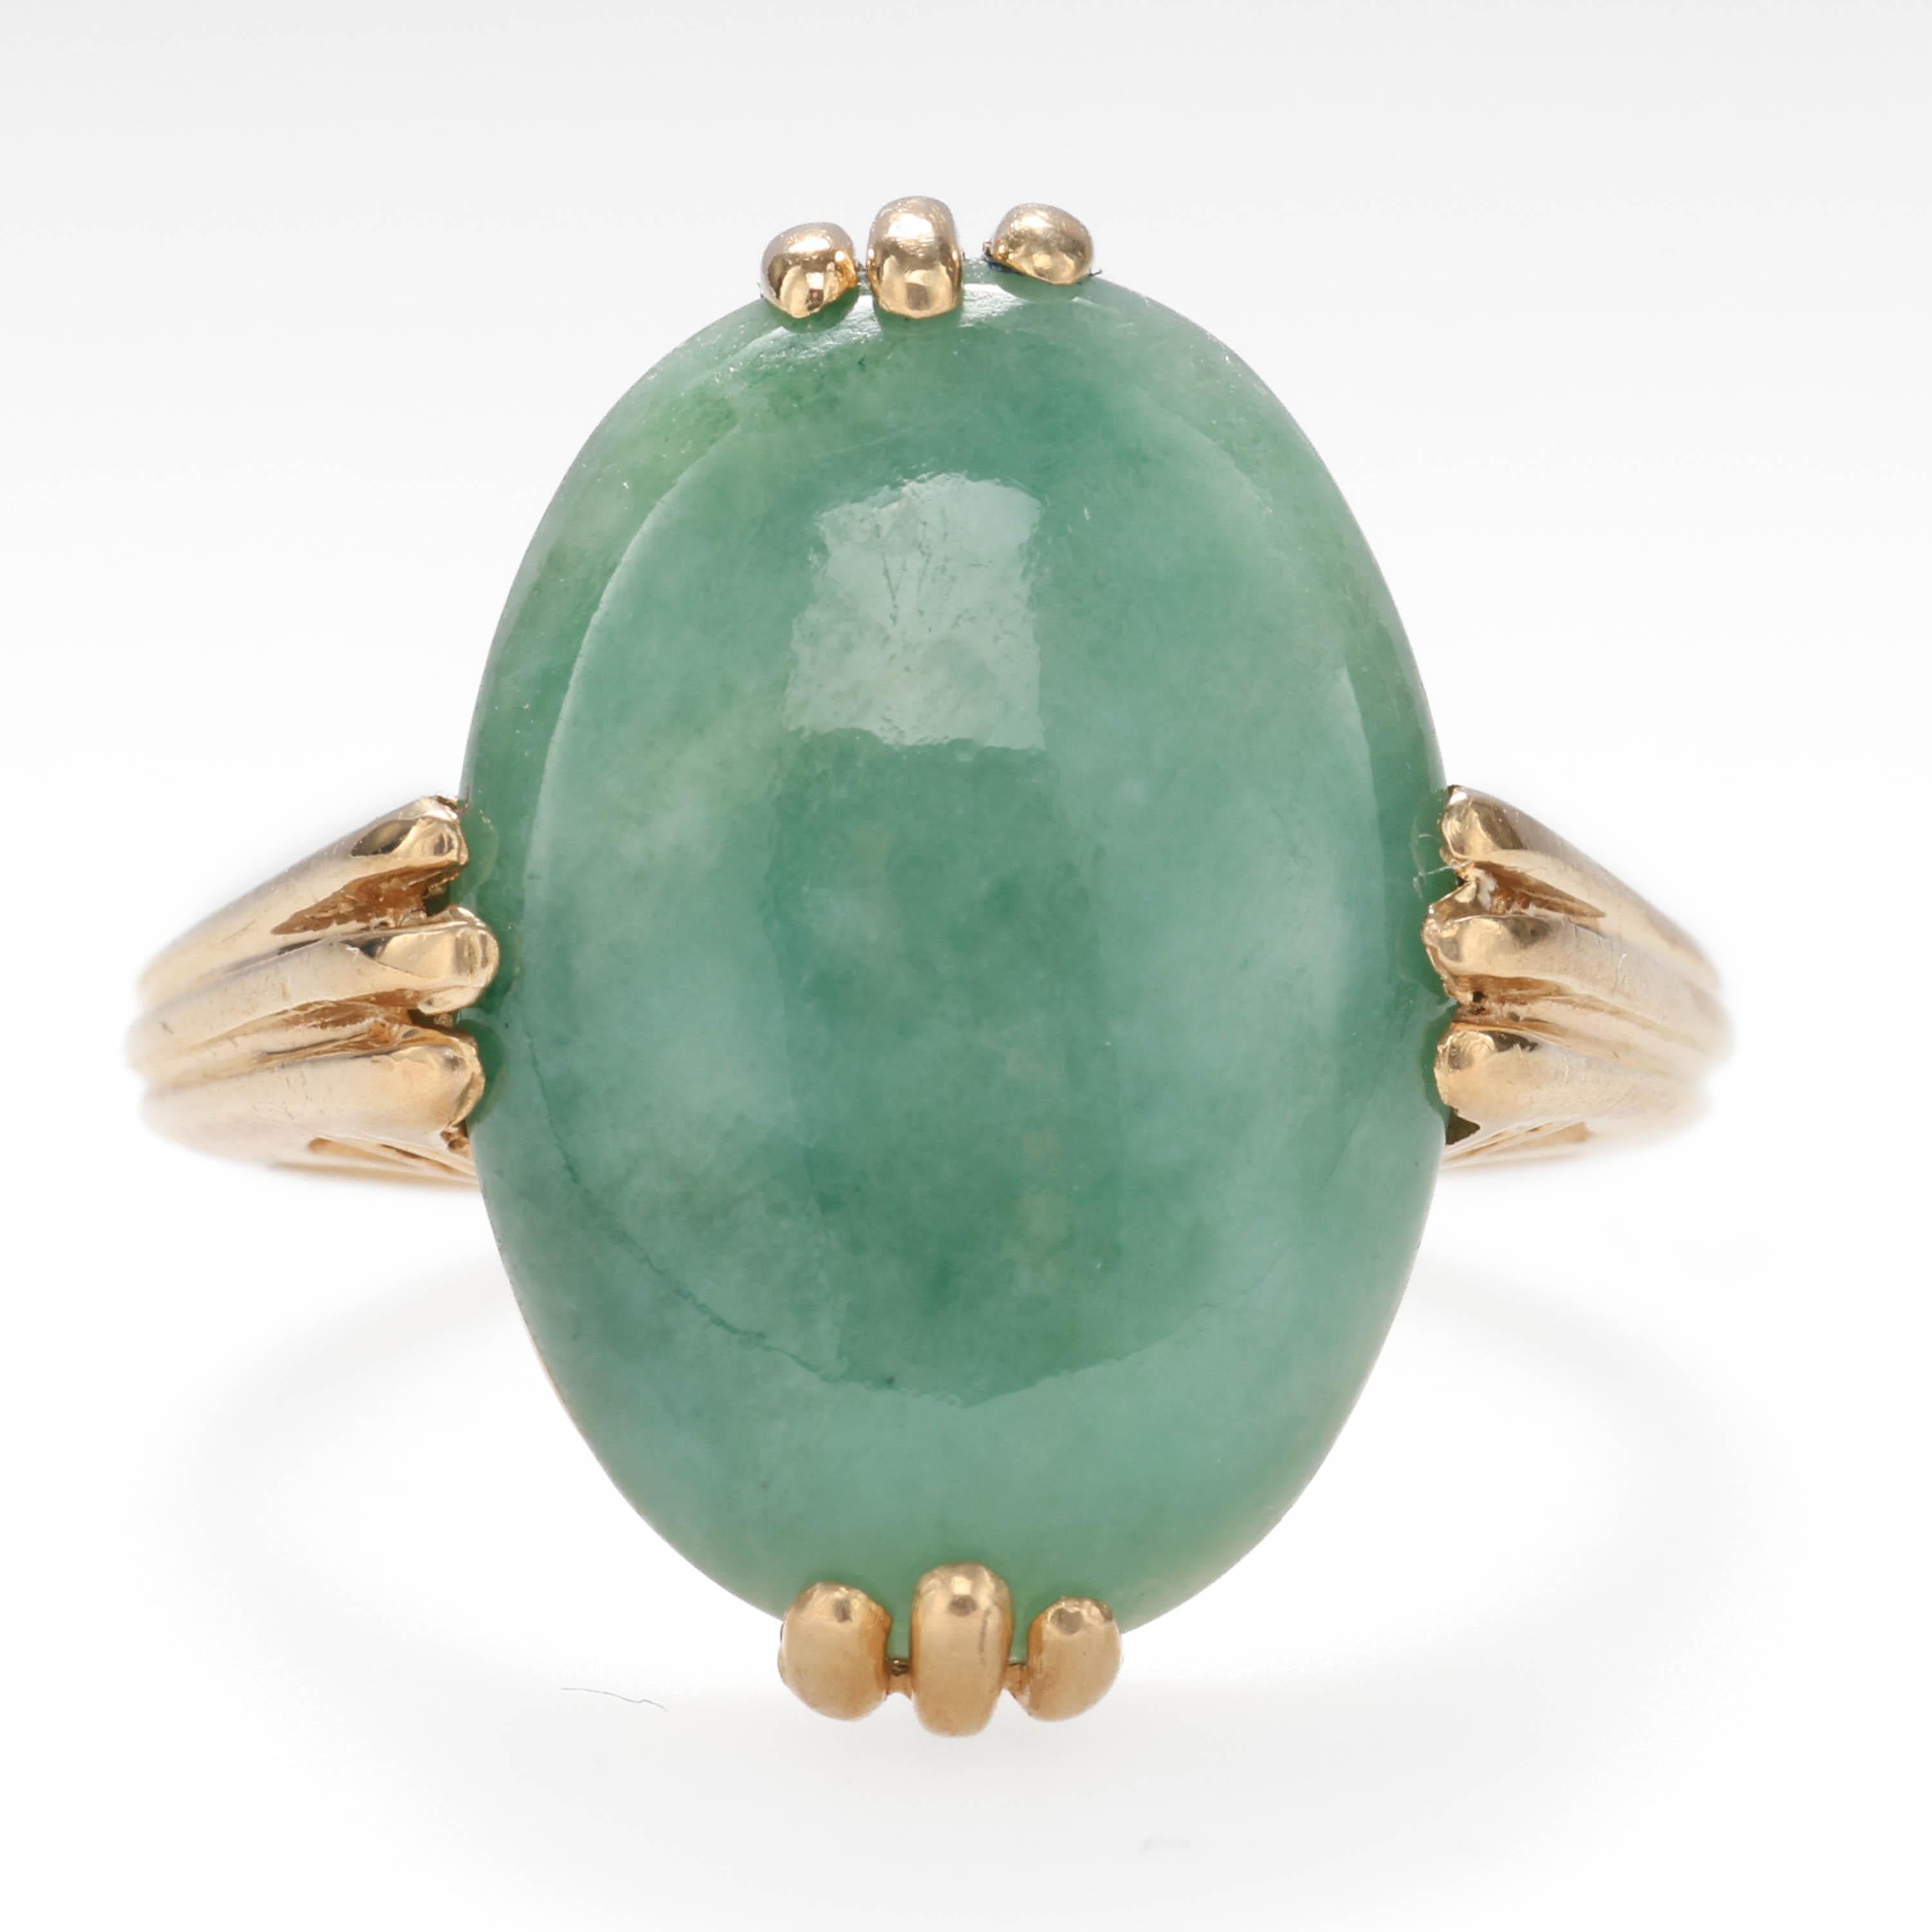 A bold oval cabochon of gorgeous sage green natural and untreated jadeite jade is gripped at all compass points by buttery 14k yellow gold in this Midcentury (circa 1960s) ring. 

The jade stone measures 16mm x 11.8mm x 3.88mm and the photos do an